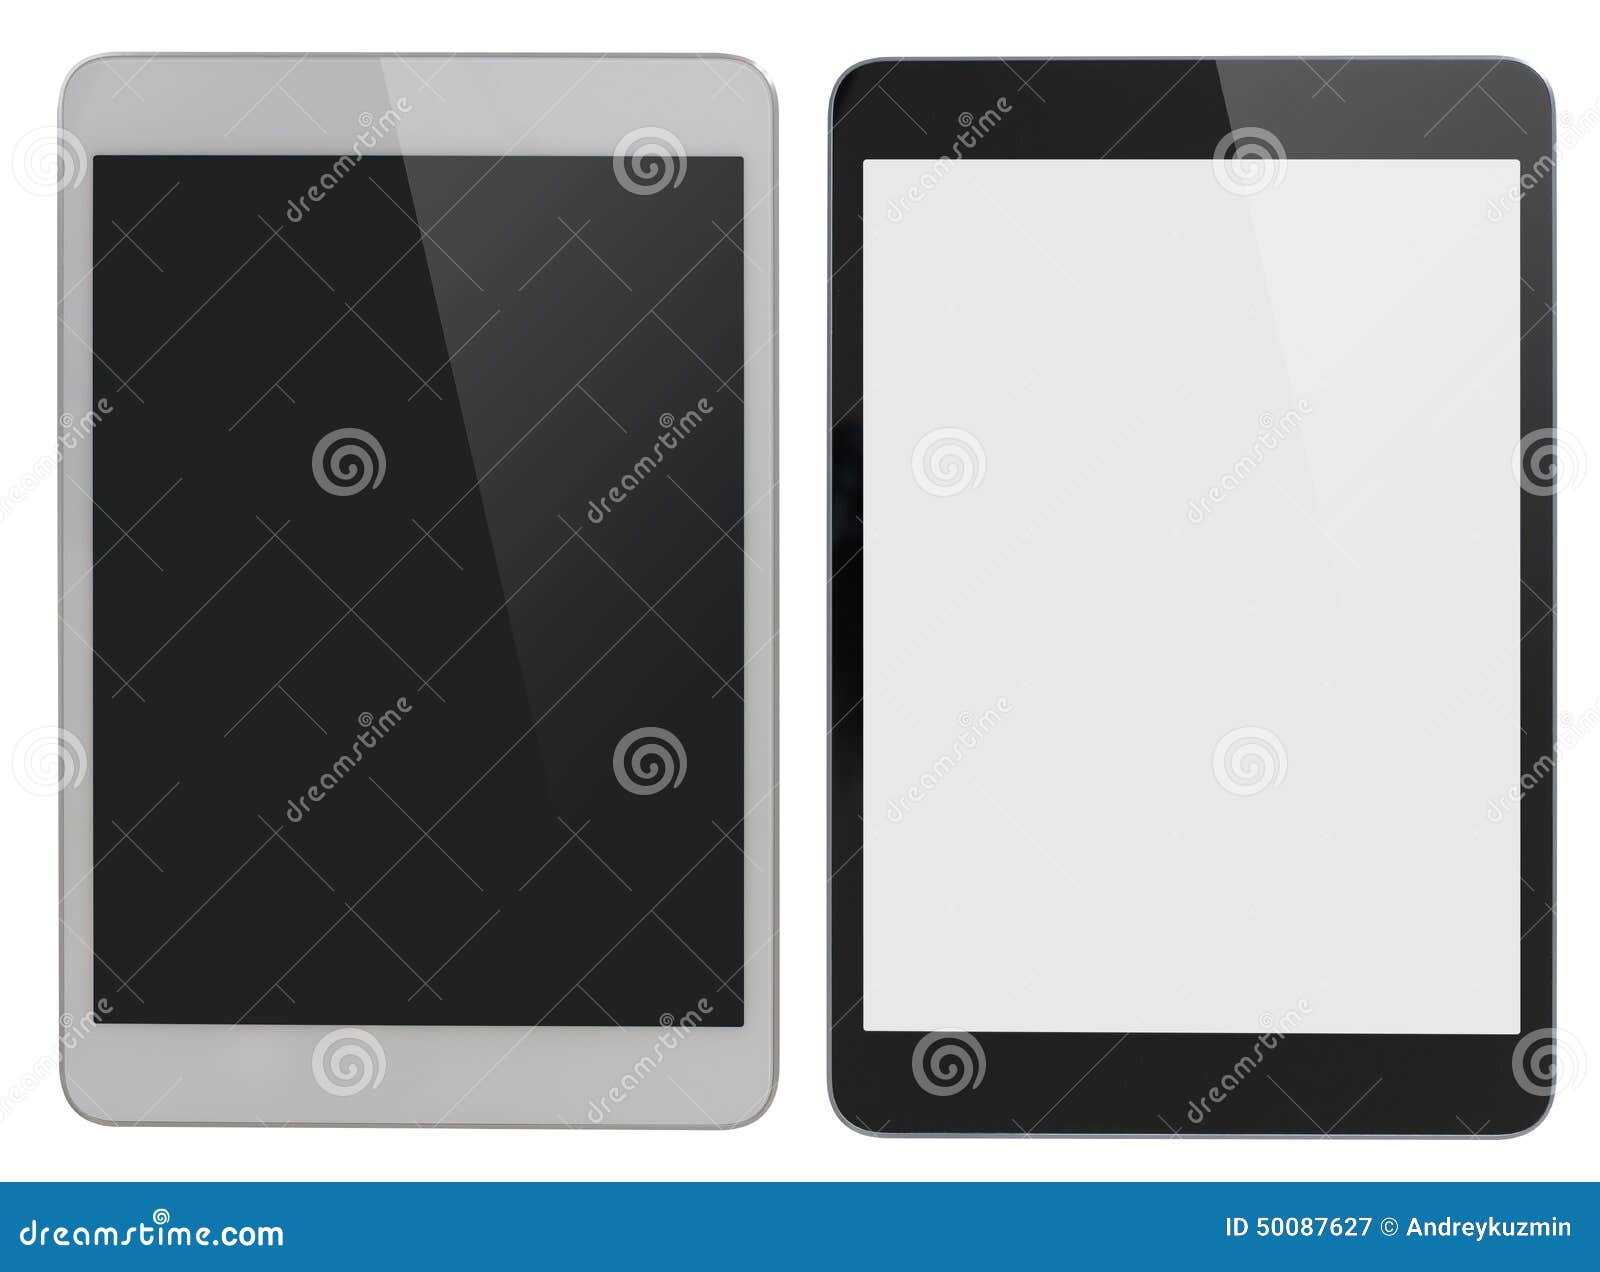 modern tablet pc similar to ipad  with